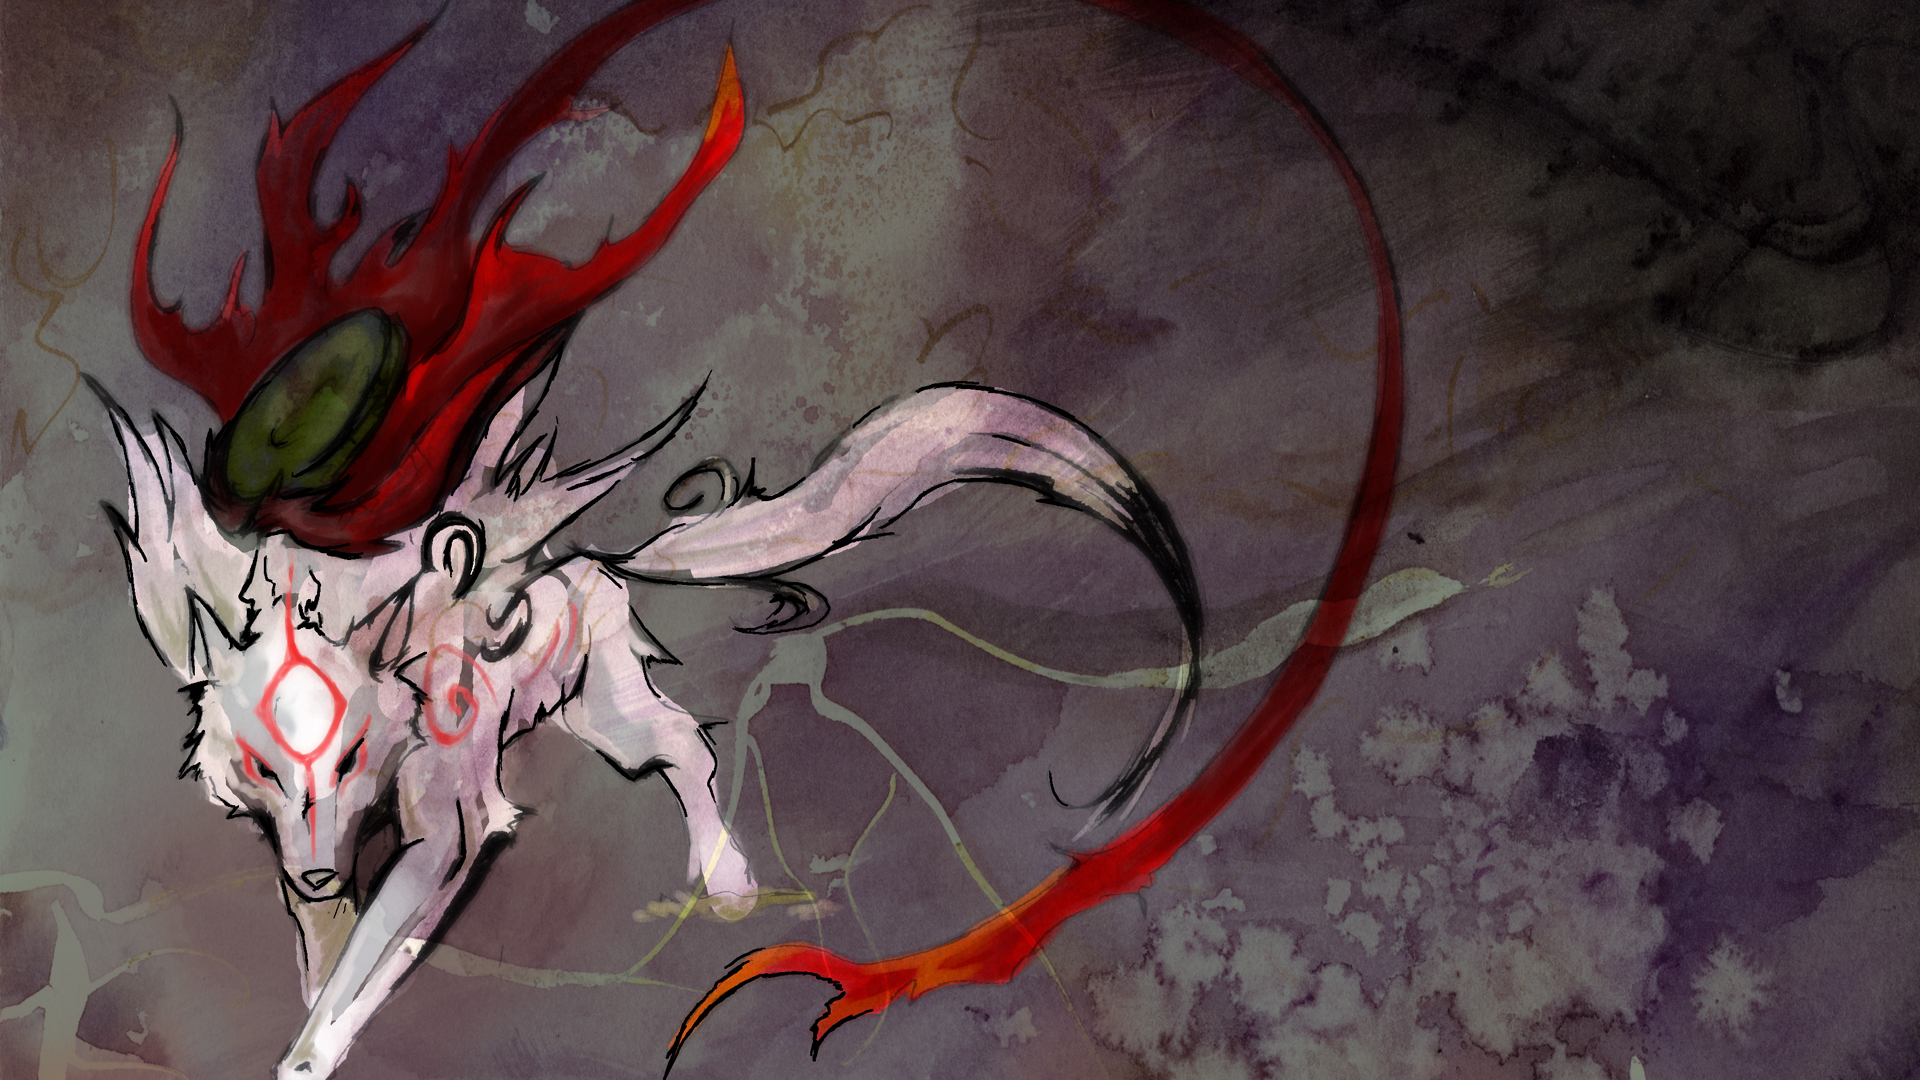 Okami Wallpaper 1080p from Shadow of Death